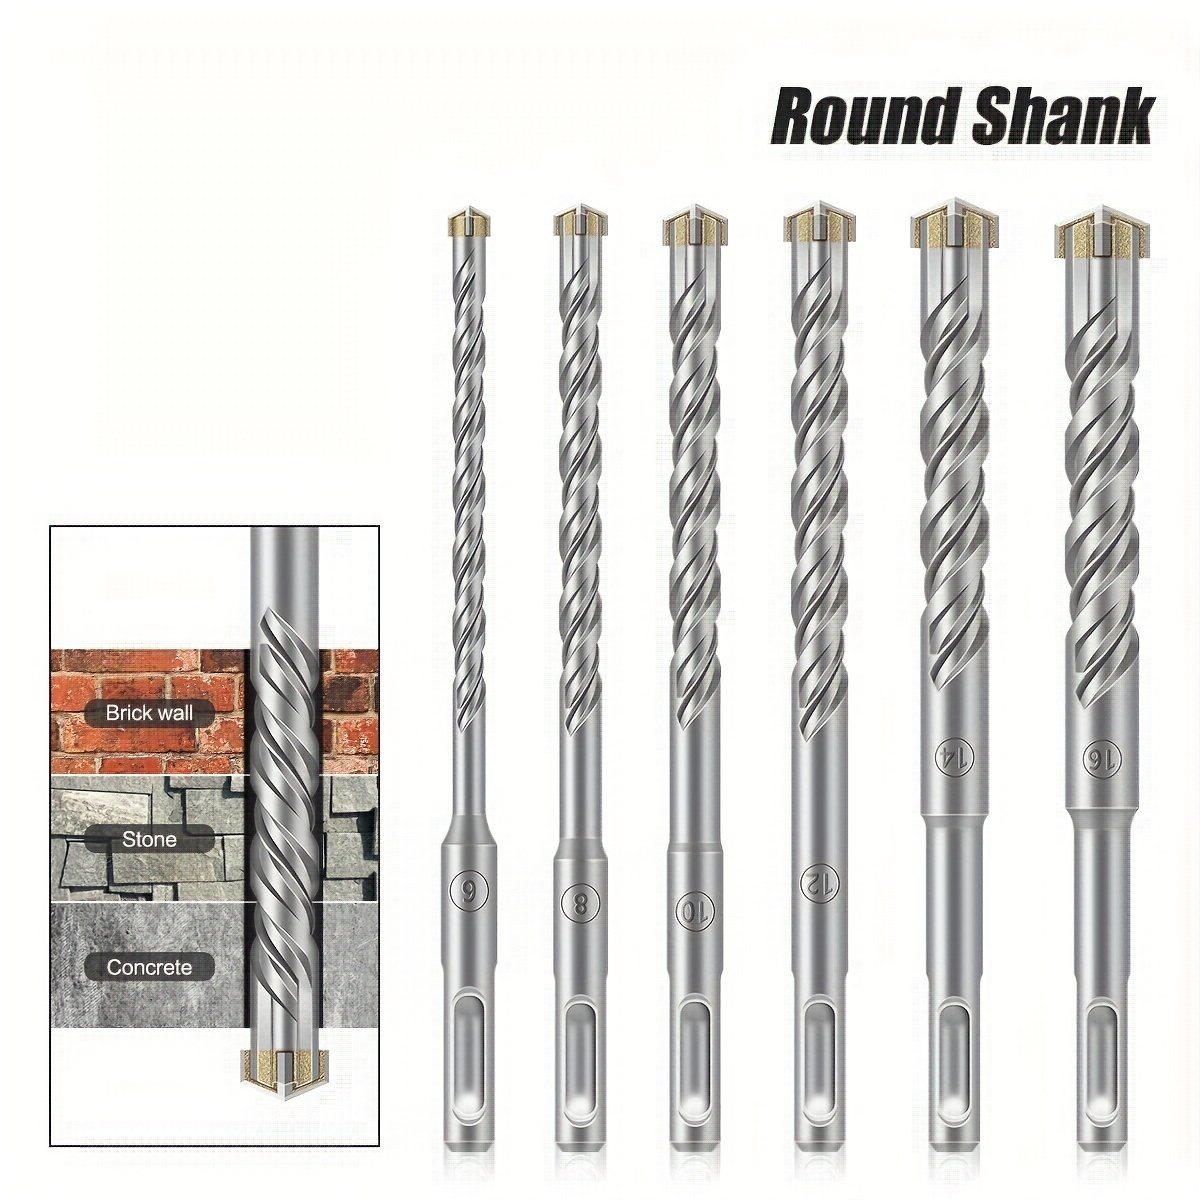 

1pc/6pcs, Hammer Drill Bits, Round Shank, Multi-size (6mm-16mm), For Concrete, Brick Wall And Stone Drilling